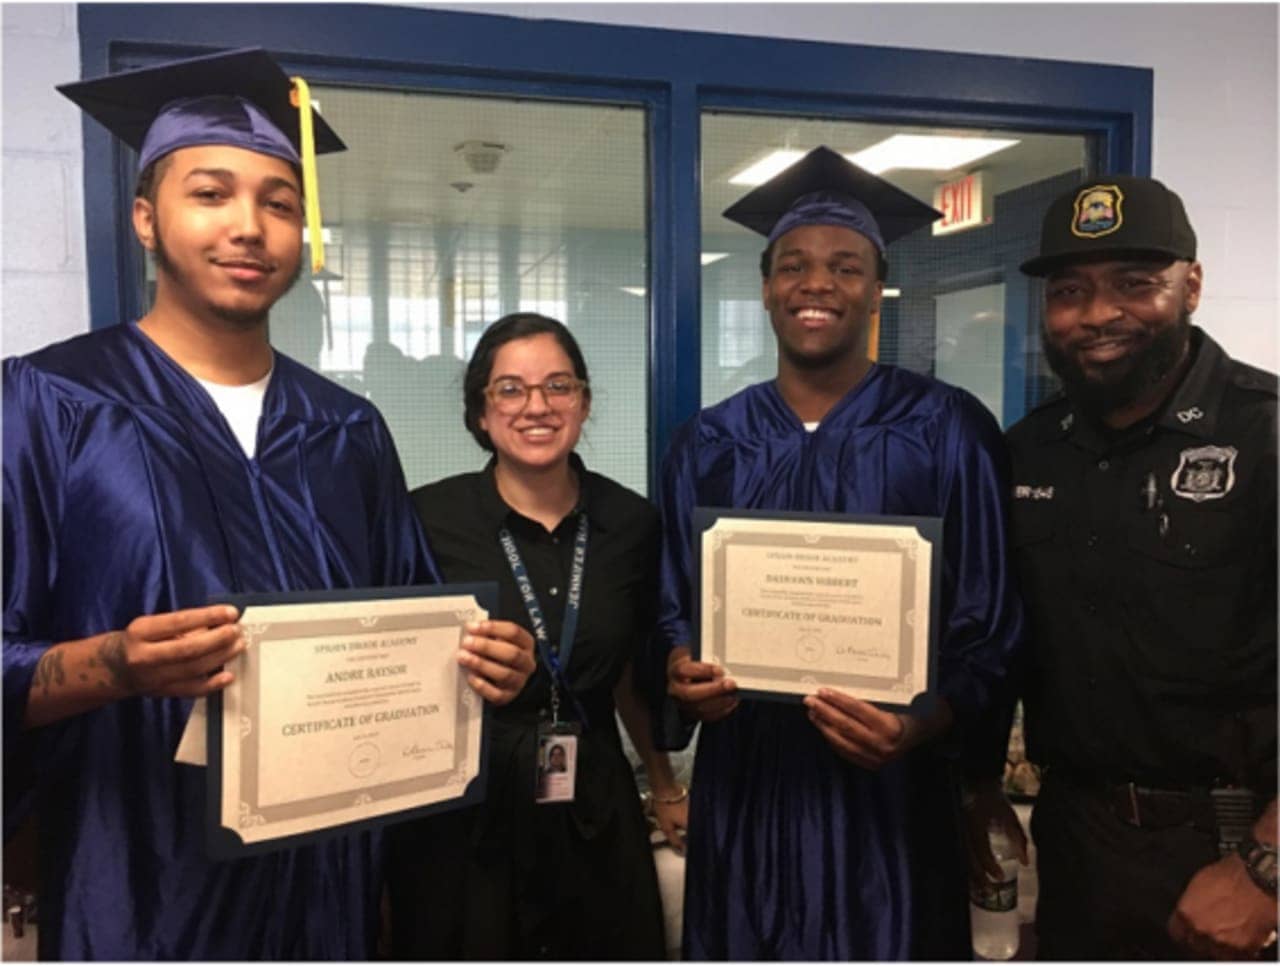 Ten students received their high school diplomas at a commencement ceremony held by the Westchester County Department of Corrections.